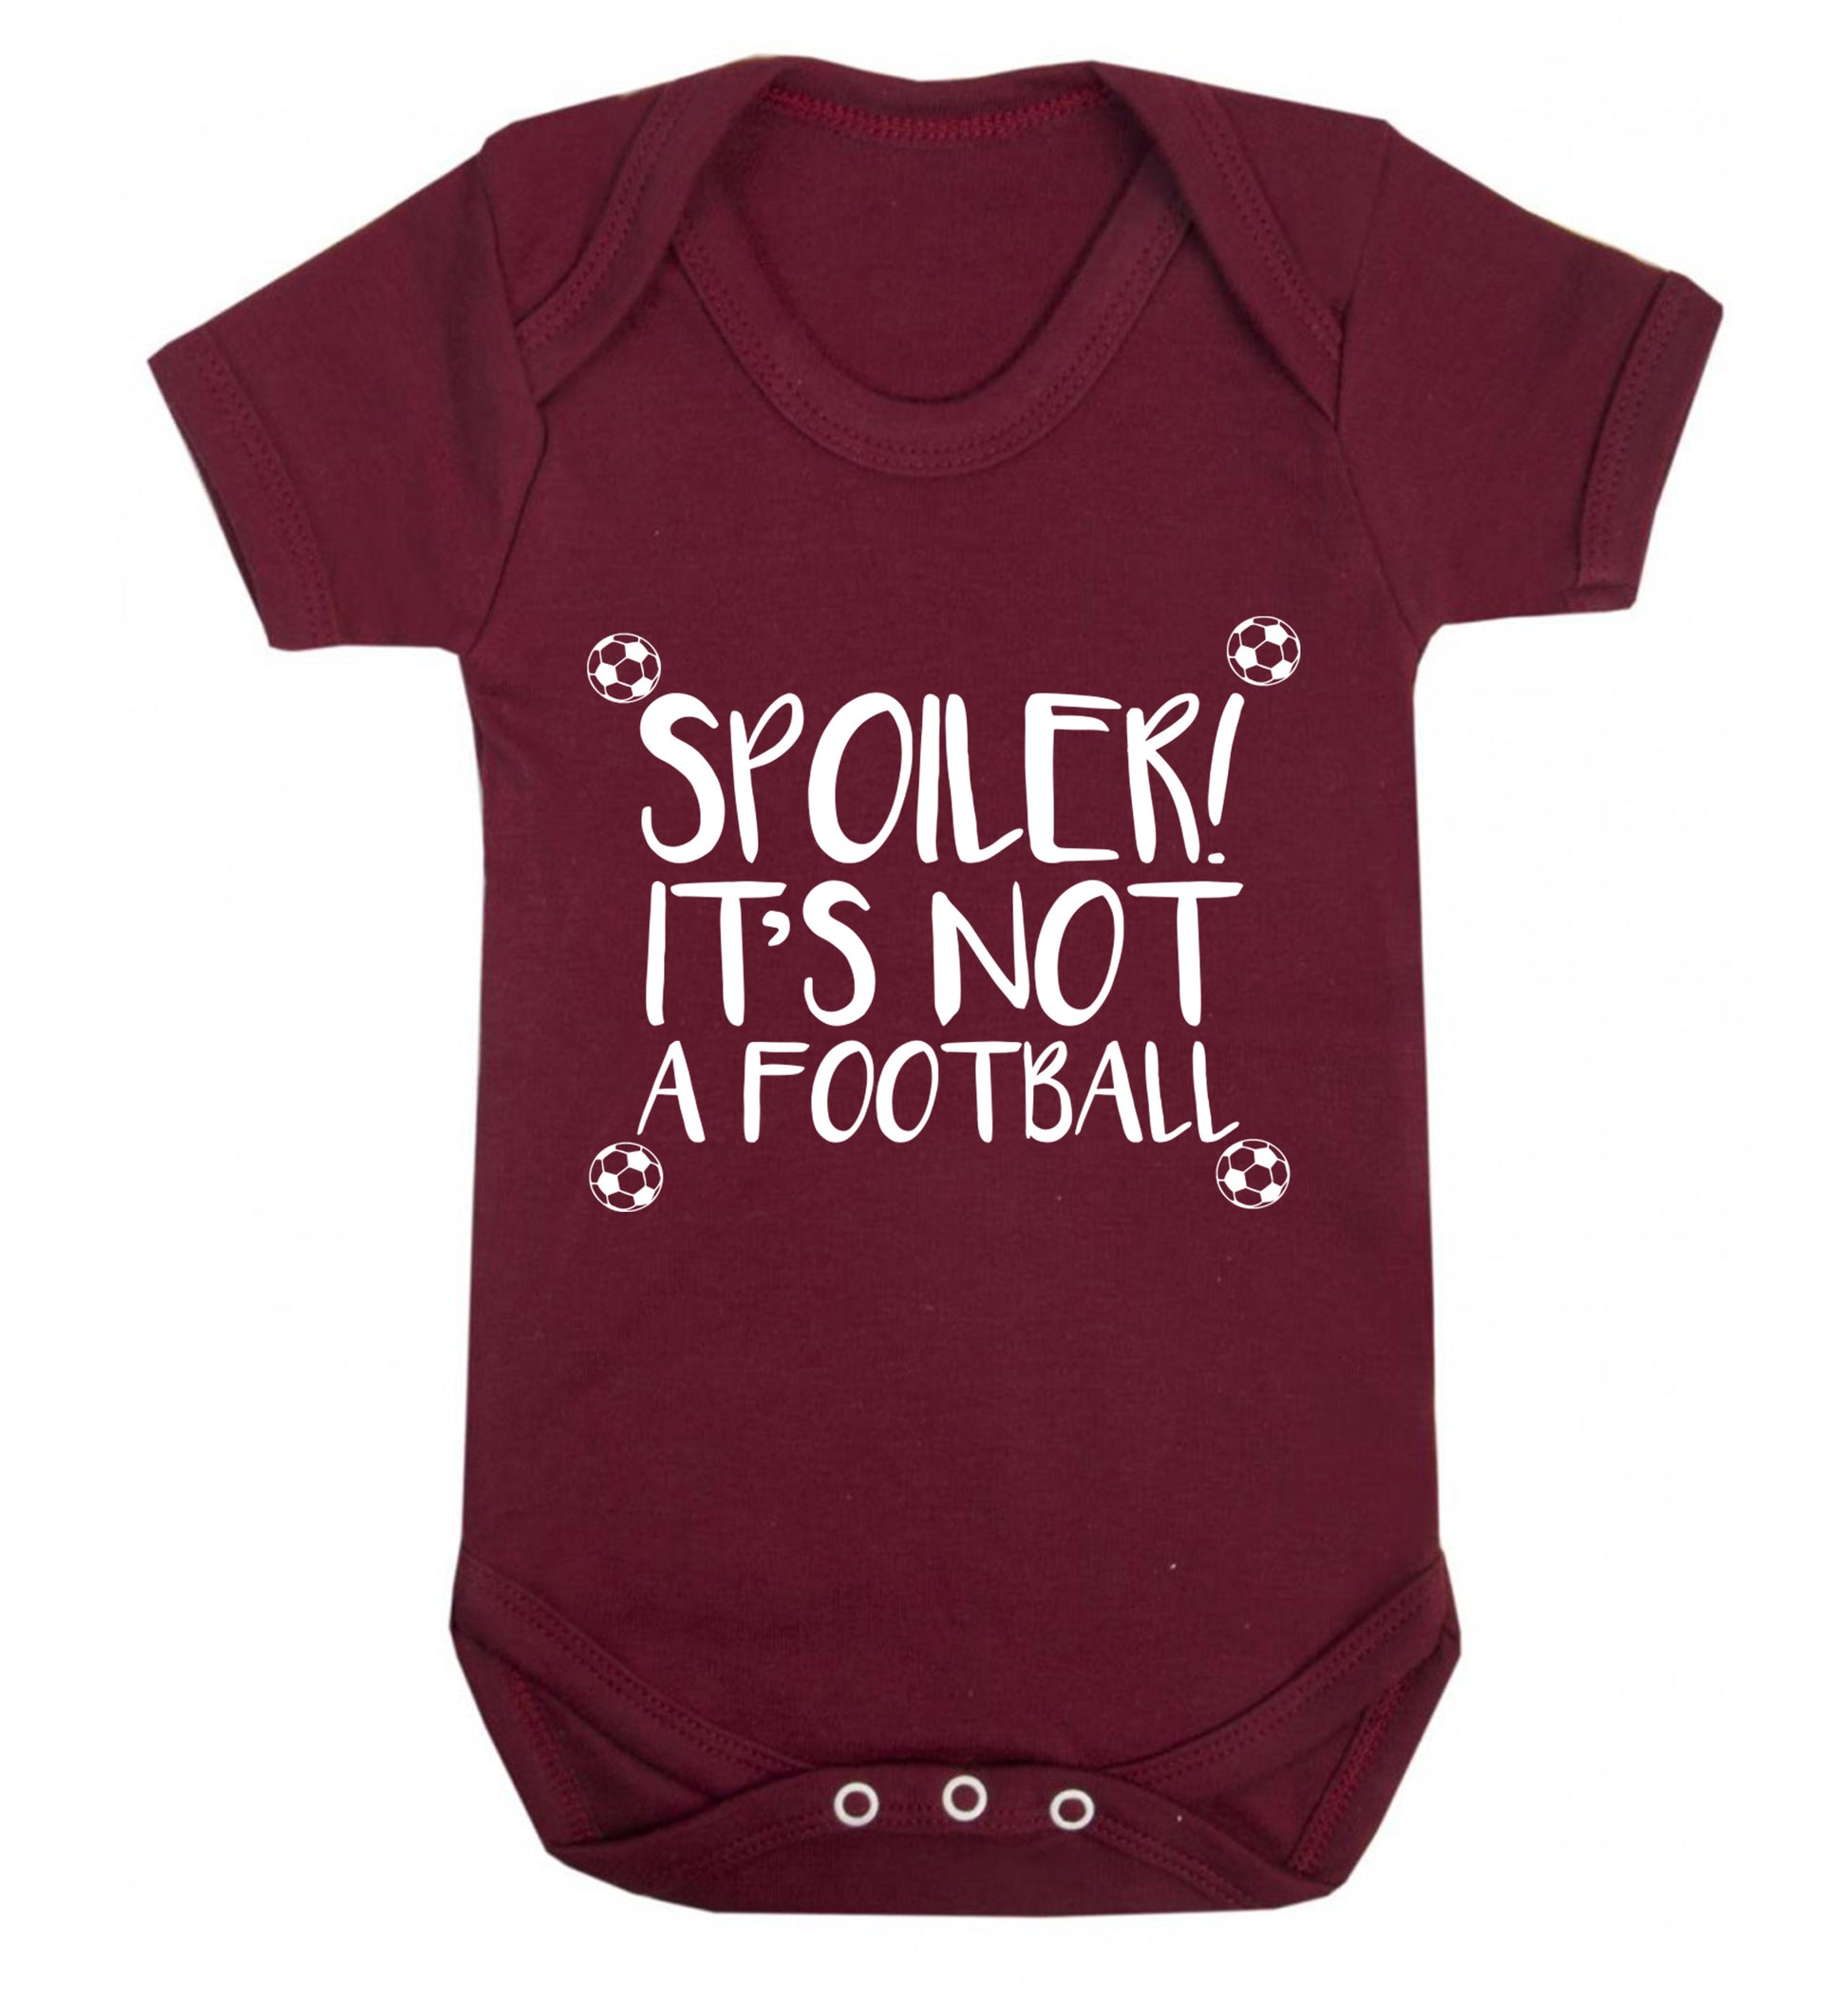 Spoiler it's not a football Baby Vest maroon 18-24 months